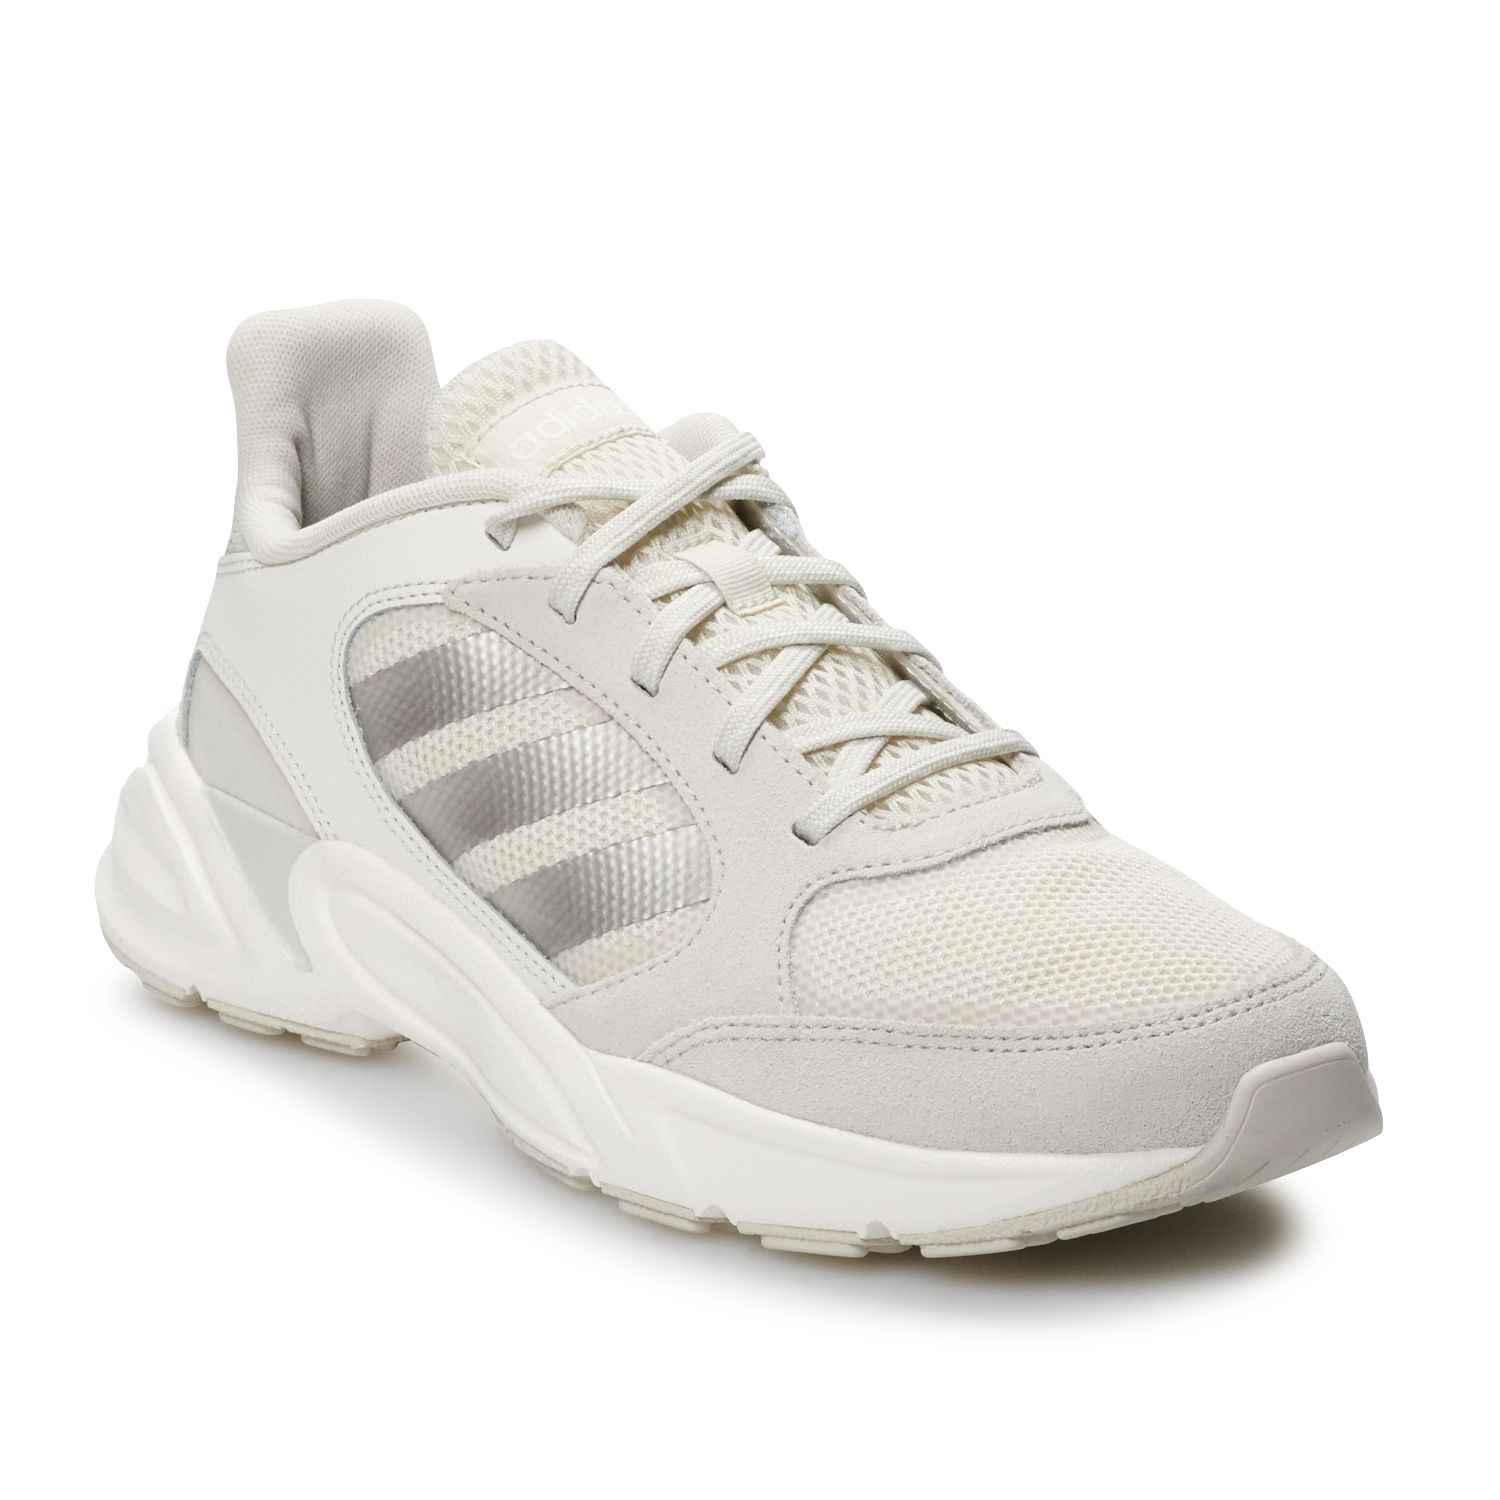 adidas 90s valasion women's running shoes